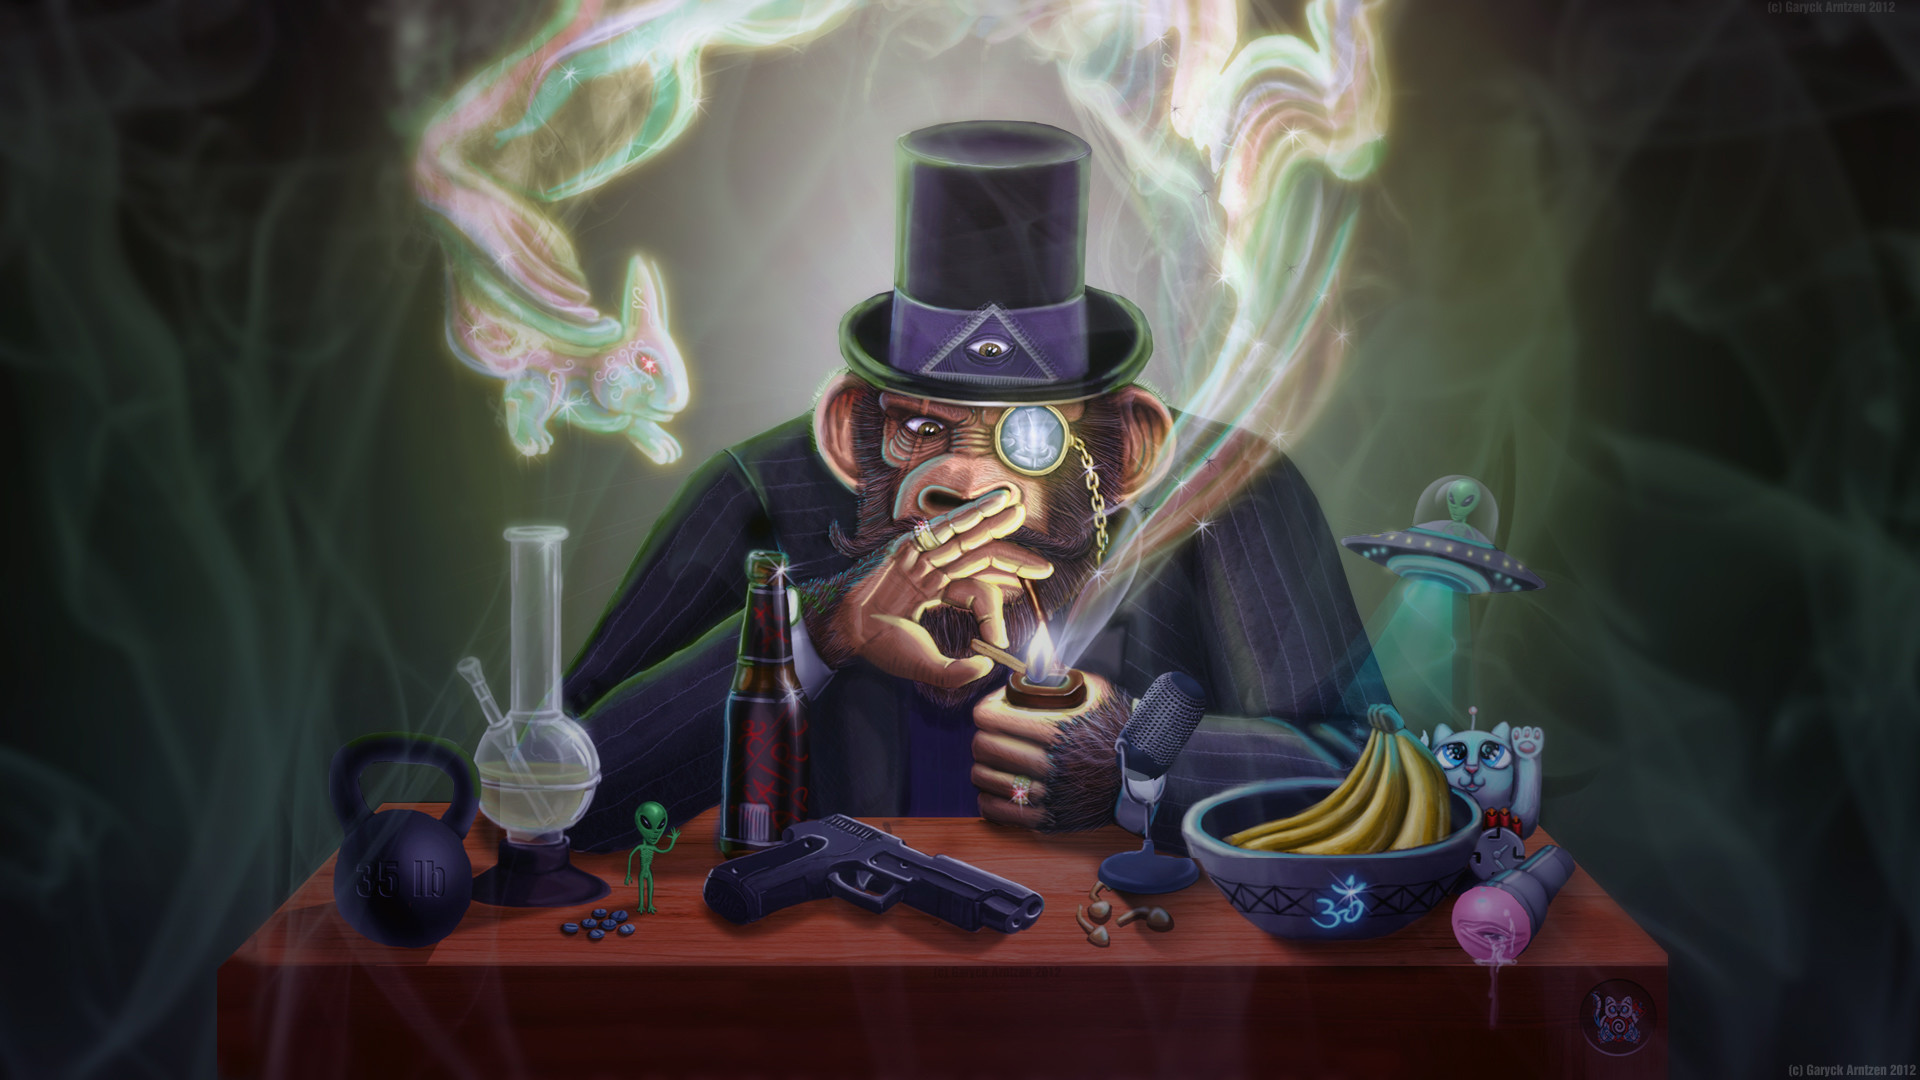 1920x1080 monocle, handgun, cartoons, view, hd free background images, , beer,  monkey, psychedelic,the, wtf, pipe, experience, windows desktop images,blue,  joe, ufo, ...